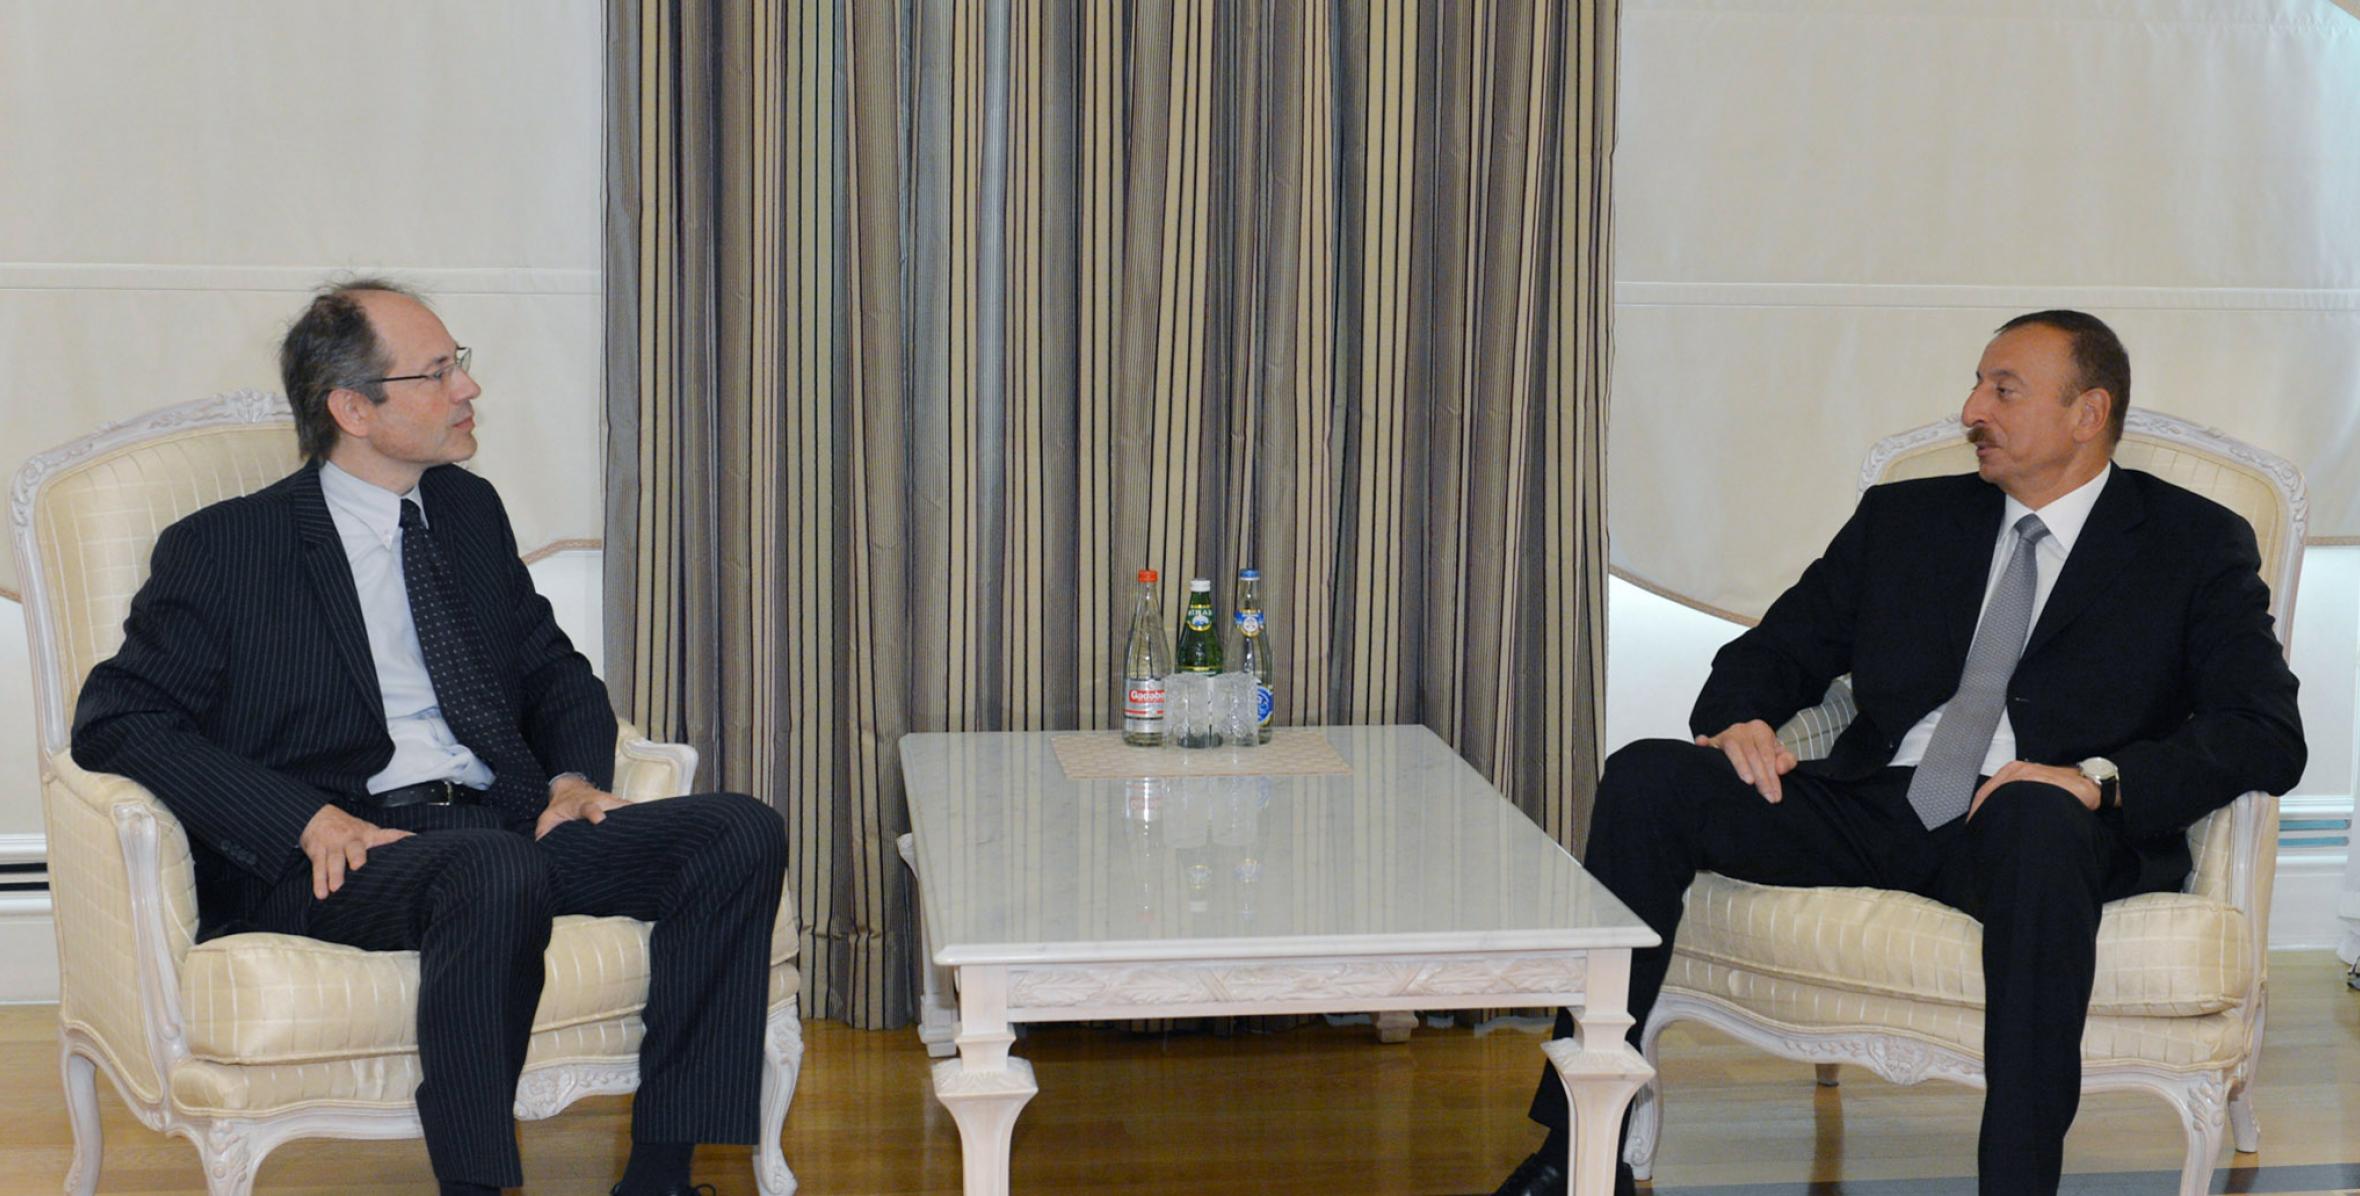 Ilham Aliyev received the outgoing Belgian Ambassador to Azerbaijan at the end of his diplomatic mission